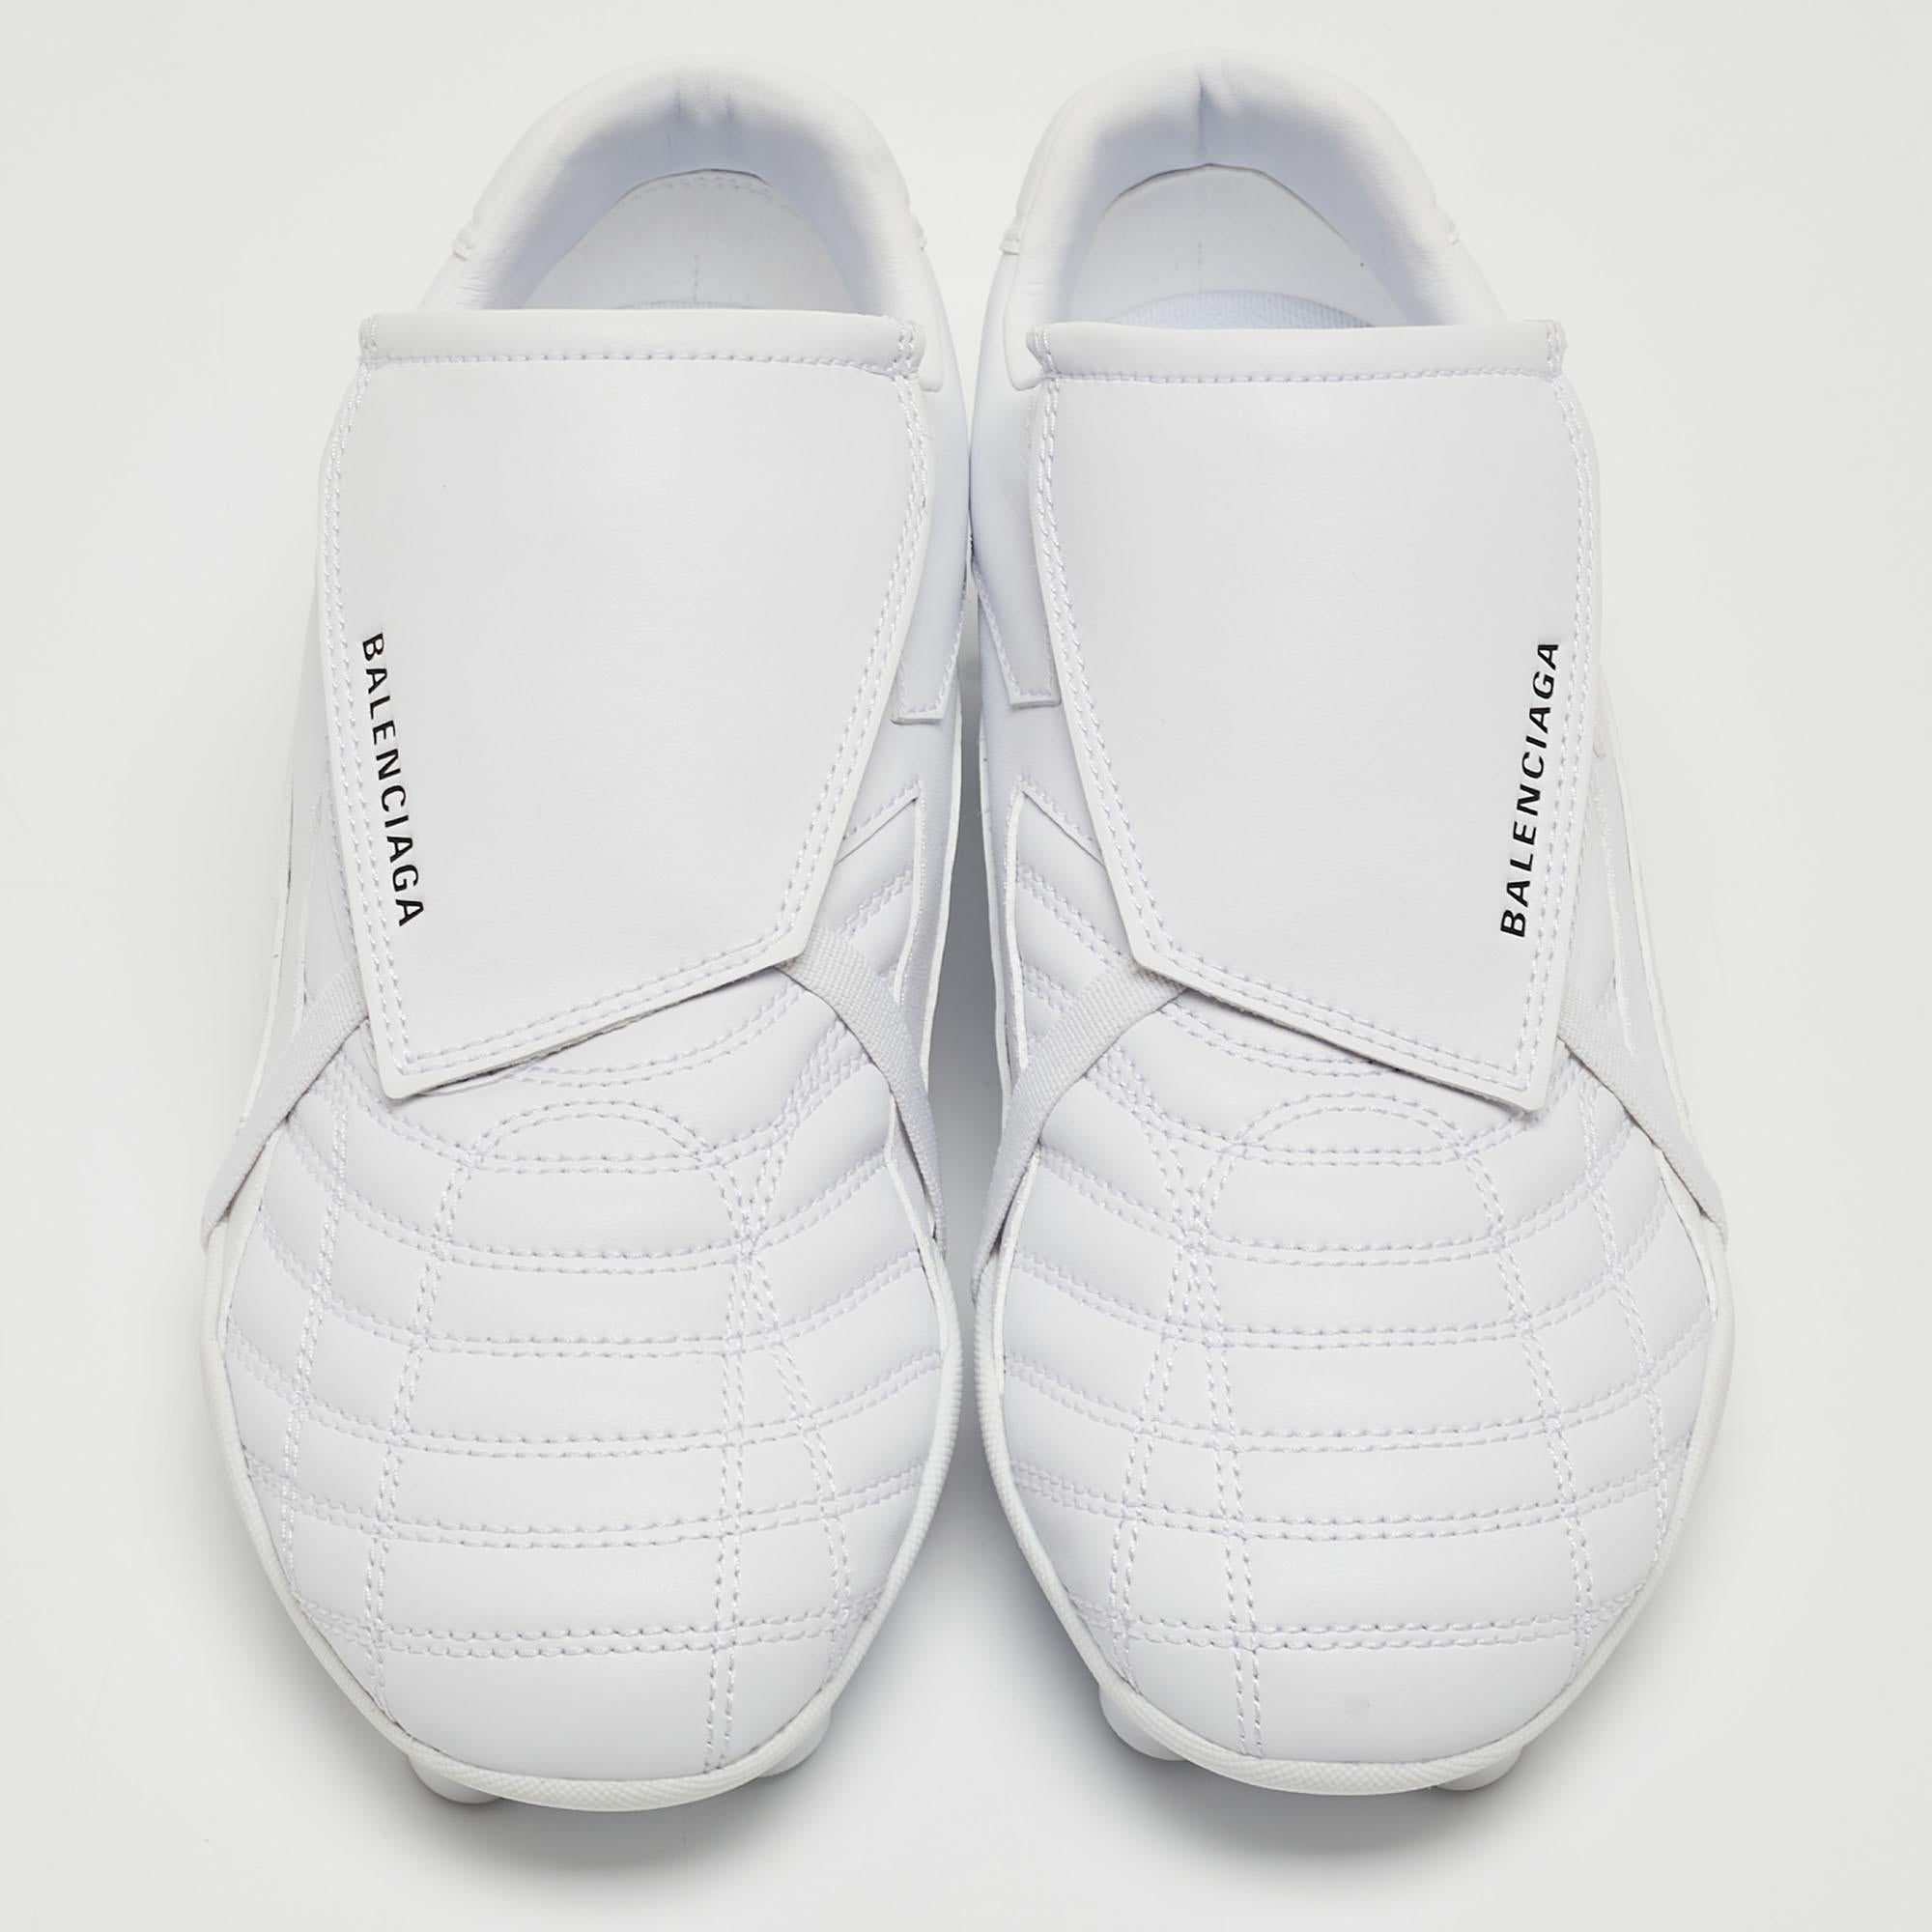 Elevate your casual attire with Balenciaga's sneakers. Crafted with precision from high-quality faux leather, these sneakers exude contemporary charm. The clean white hue adds versatility, while the soccer-inspired design offers a sporty edge.